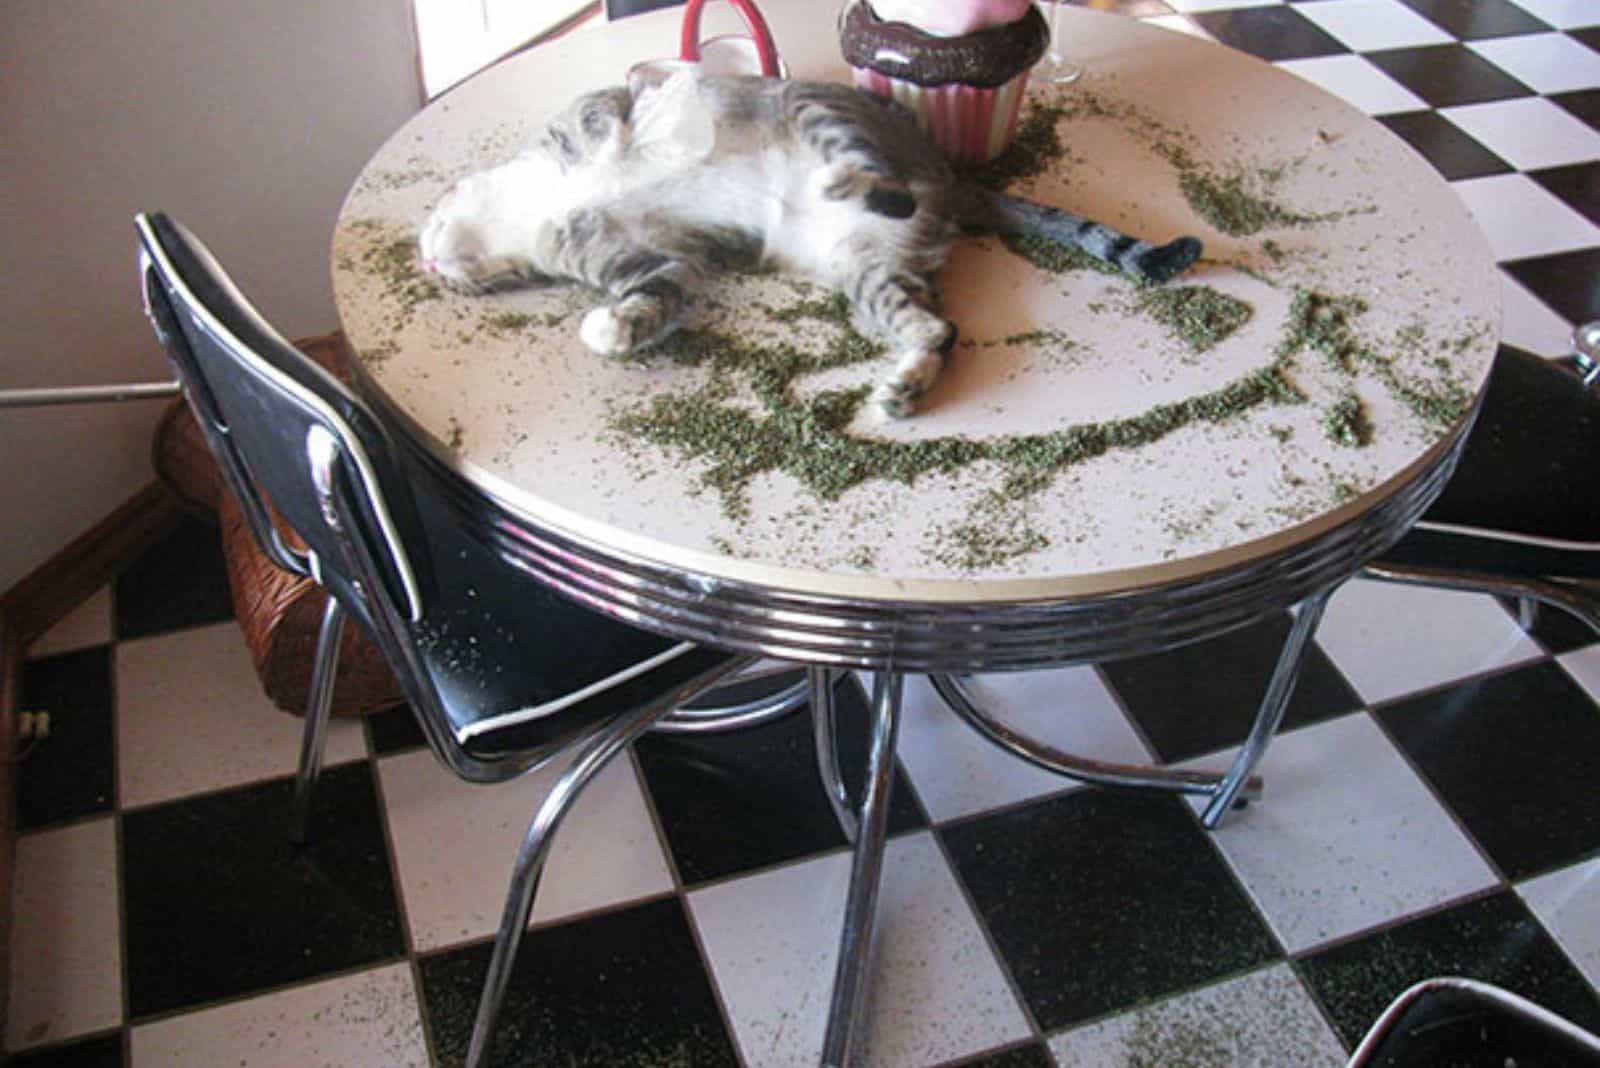 cat with herbs on table